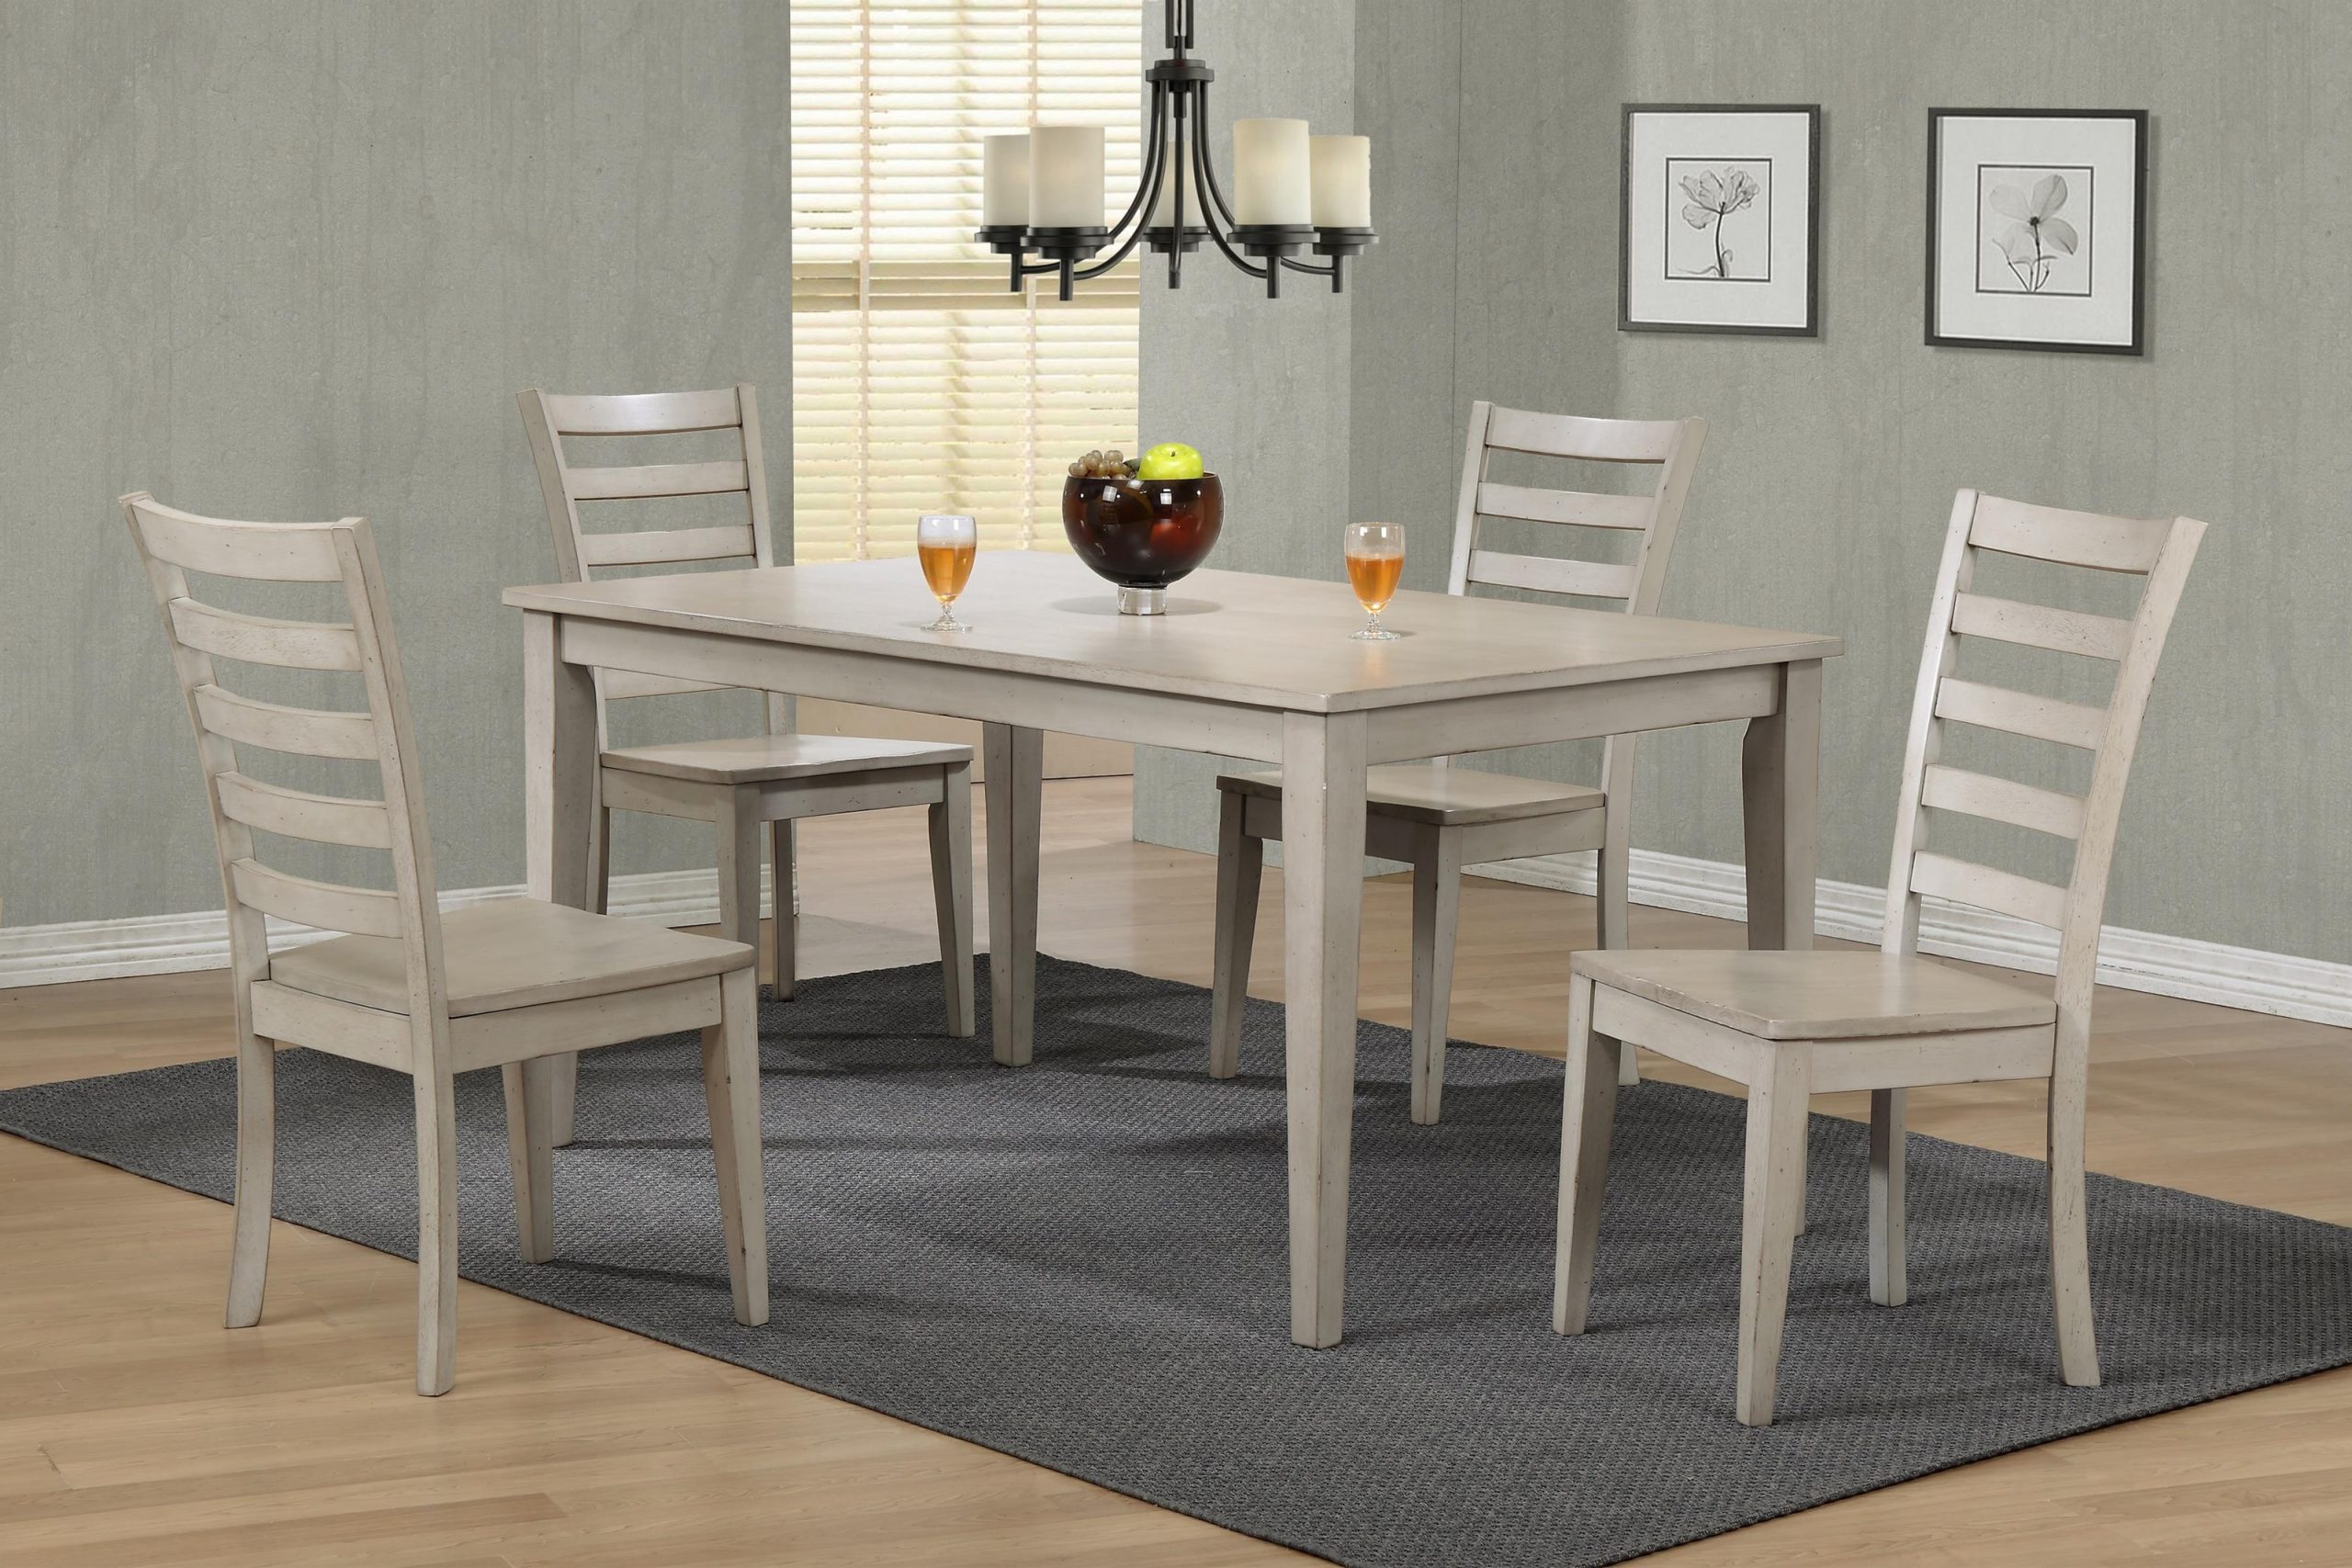 Bhs Dining Room Table And Chairs